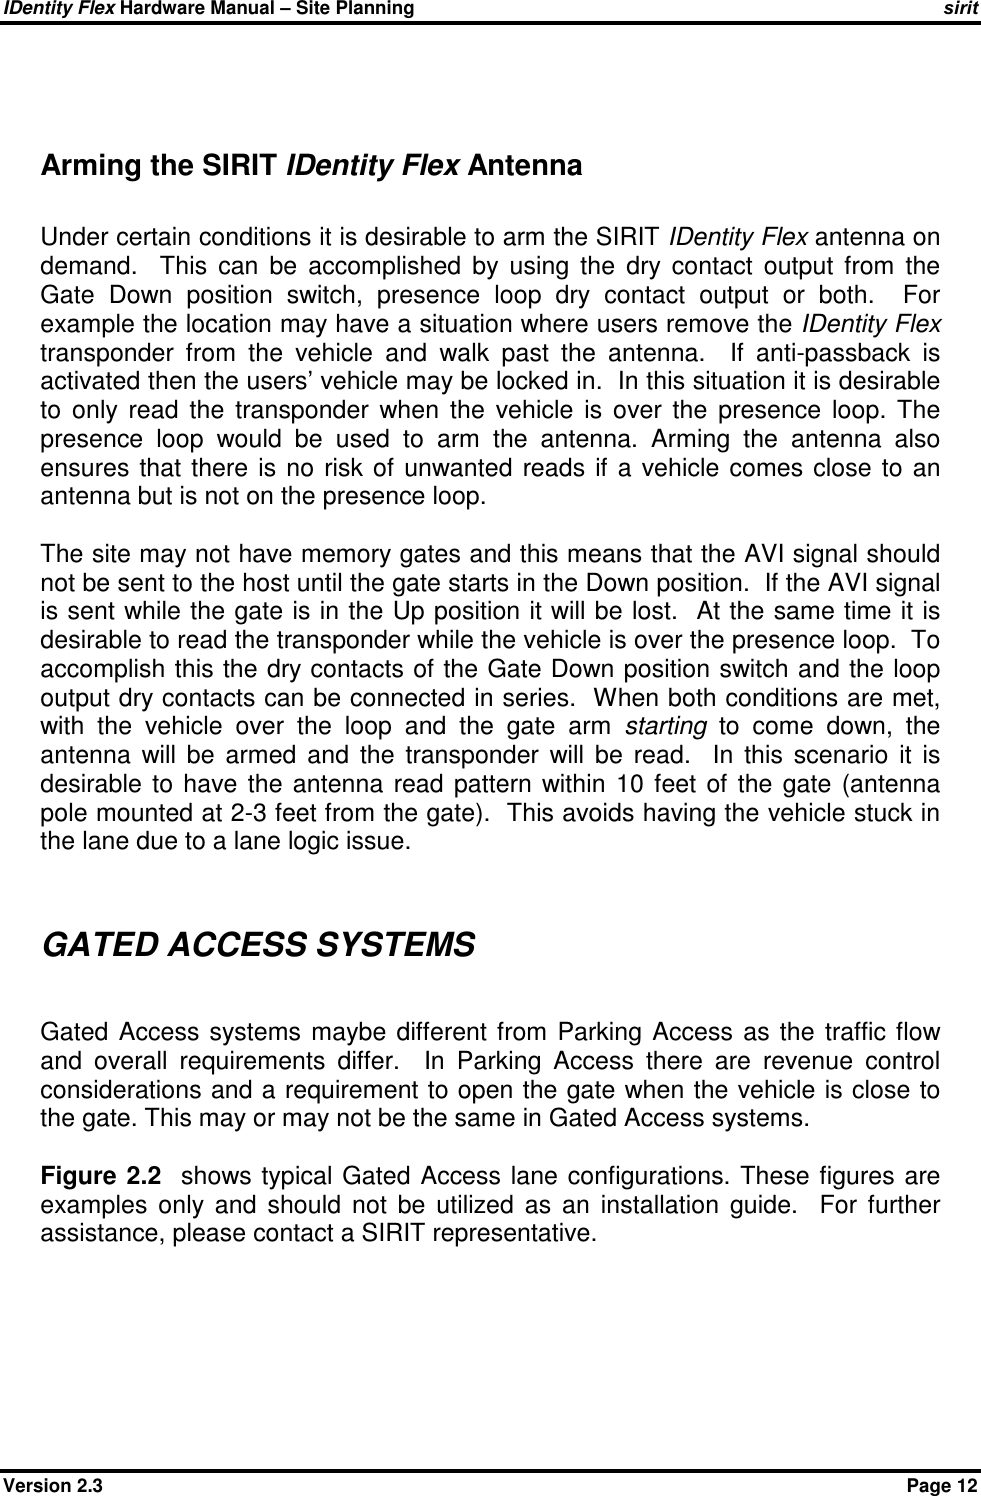 IDentity Flex Hardware Manual – Site Planning    sirit Version 2.3    Page 12   Arming the SIRIT IDentity Flex Antenna  Under certain conditions it is desirable to arm the SIRIT IDentity Flex antenna on demand.    This  can  be  accomplished  by  using  the  dry  contact  output  from  the Gate  Down  position  switch,  presence  loop  dry  contact  output  or  both.    For example the location may have a situation where users remove the IDentity Flex transponder  from  the  vehicle  and  walk  past  the  antenna.    If  anti-passback  is activated then the users’ vehicle may be locked in.  In this situation it is desirable to  only  read  the  transponder  when  the  vehicle  is  over  the  presence  loop.  The presence  loop  would  be  used  to  arm  the  antenna.  Arming  the  antenna  also ensures  that  there  is  no  risk of  unwanted  reads  if  a  vehicle comes  close  to  an antenna but is not on the presence loop.  The site may not have memory gates and this means that the AVI signal should not be sent to the host until the gate starts in the Down position.  If the AVI signal is sent while the gate is in the Up position it will be lost.  At the same time it is desirable to read the transponder while the vehicle is over the presence loop.  To accomplish this the dry contacts of the Gate Down position switch and the loop output dry contacts can be connected in series.  When both conditions are met, with  the  vehicle  over  the  loop  and  the  gate  arm  starting  to  come  down,  the antenna  will  be  armed  and  the  transponder  will  be  read.    In  this  scenario  it  is desirable  to  have  the  antenna  read  pattern  within  10  feet  of  the  gate  (antenna pole mounted at 2-3 feet from the gate).  This avoids having the vehicle stuck in the lane due to a lane logic issue.   GATED ACCESS SYSTEMS  Gated  Access  systems  maybe  different  from  Parking  Access  as  the  traffic  flow and  overall  requirements  differ.    In  Parking  Access  there  are  revenue  control considerations and a requirement to open the gate when the vehicle is close to the gate. This may or may not be the same in Gated Access systems.    Figure  2.2   shows typical  Gated  Access lane  configurations. These  figures  are examples  only  and  should  not  be  utilized  as  an  installation  guide.    For  further assistance, please contact a SIRIT representative. 